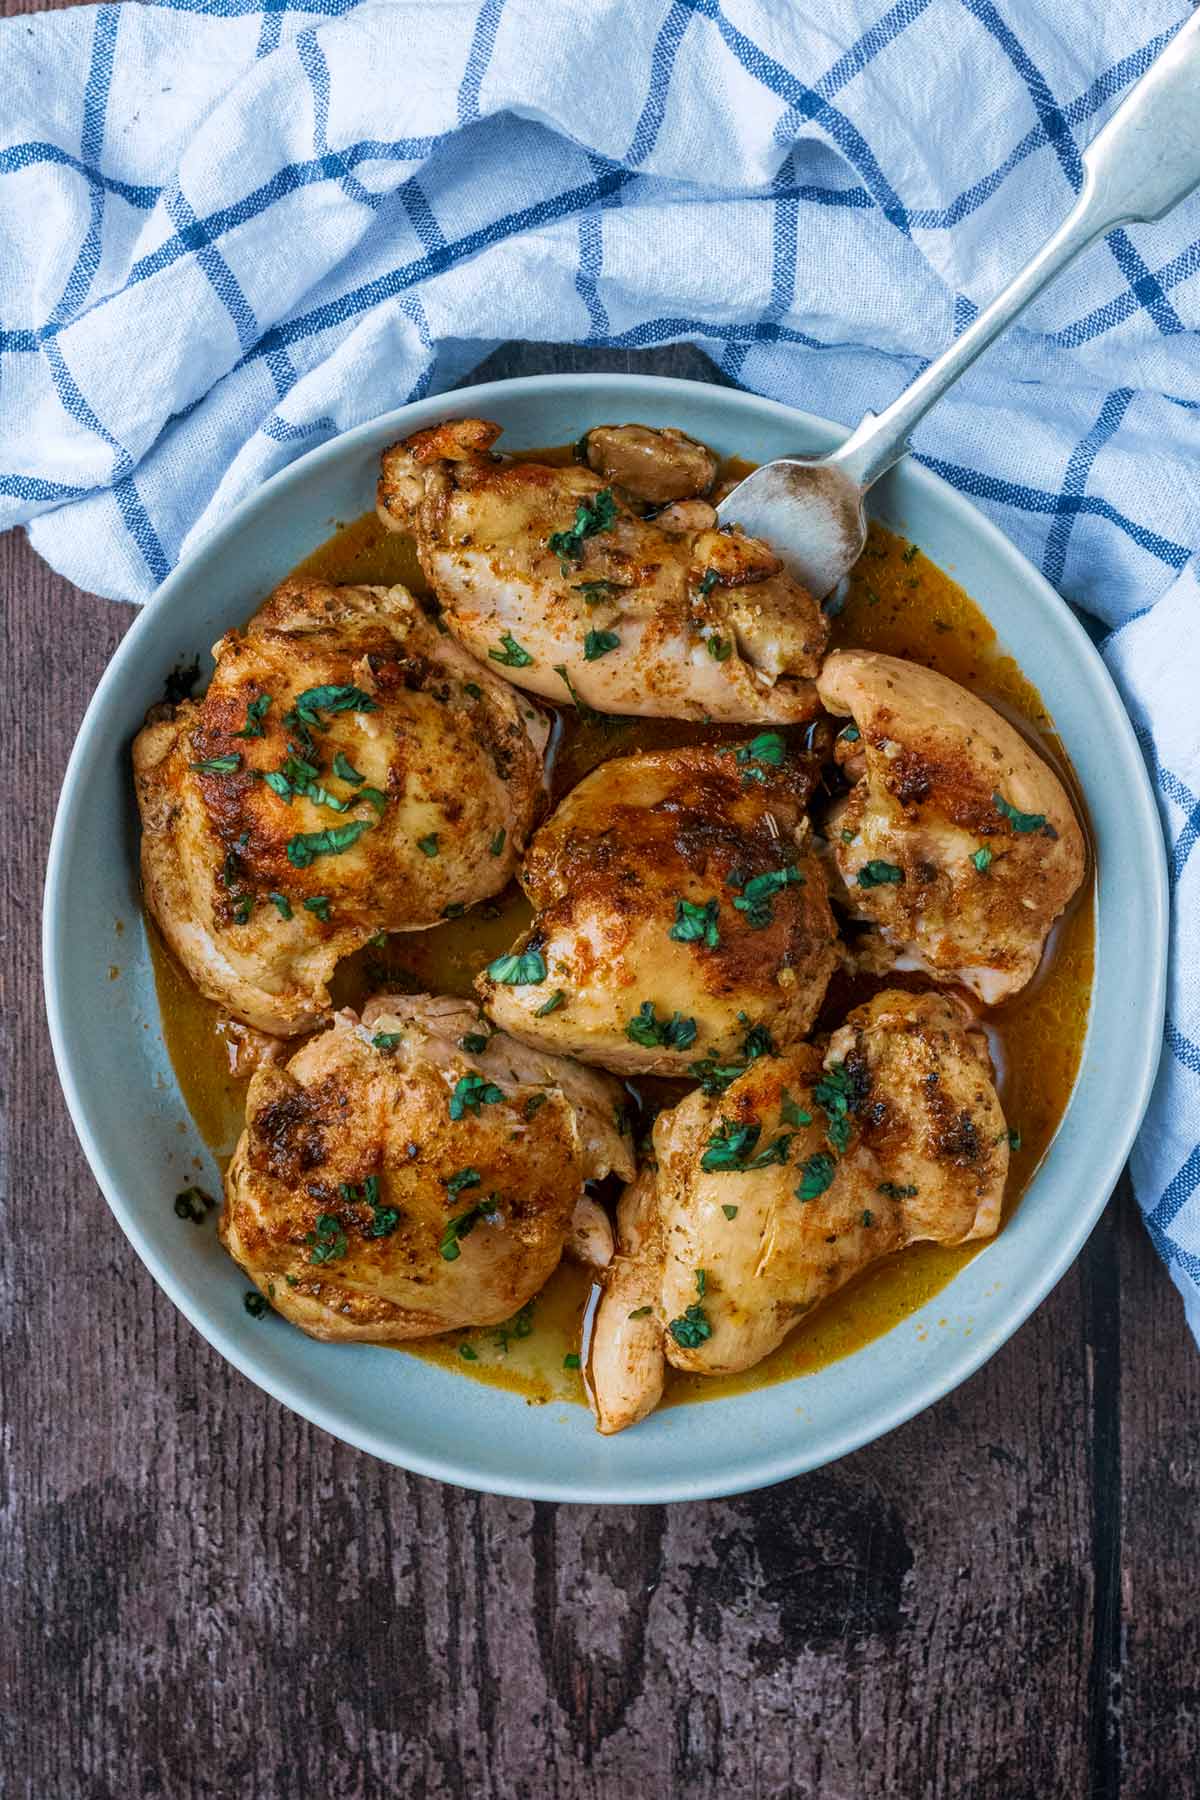 Cooked chicken thighs on a blue plate with a fork.